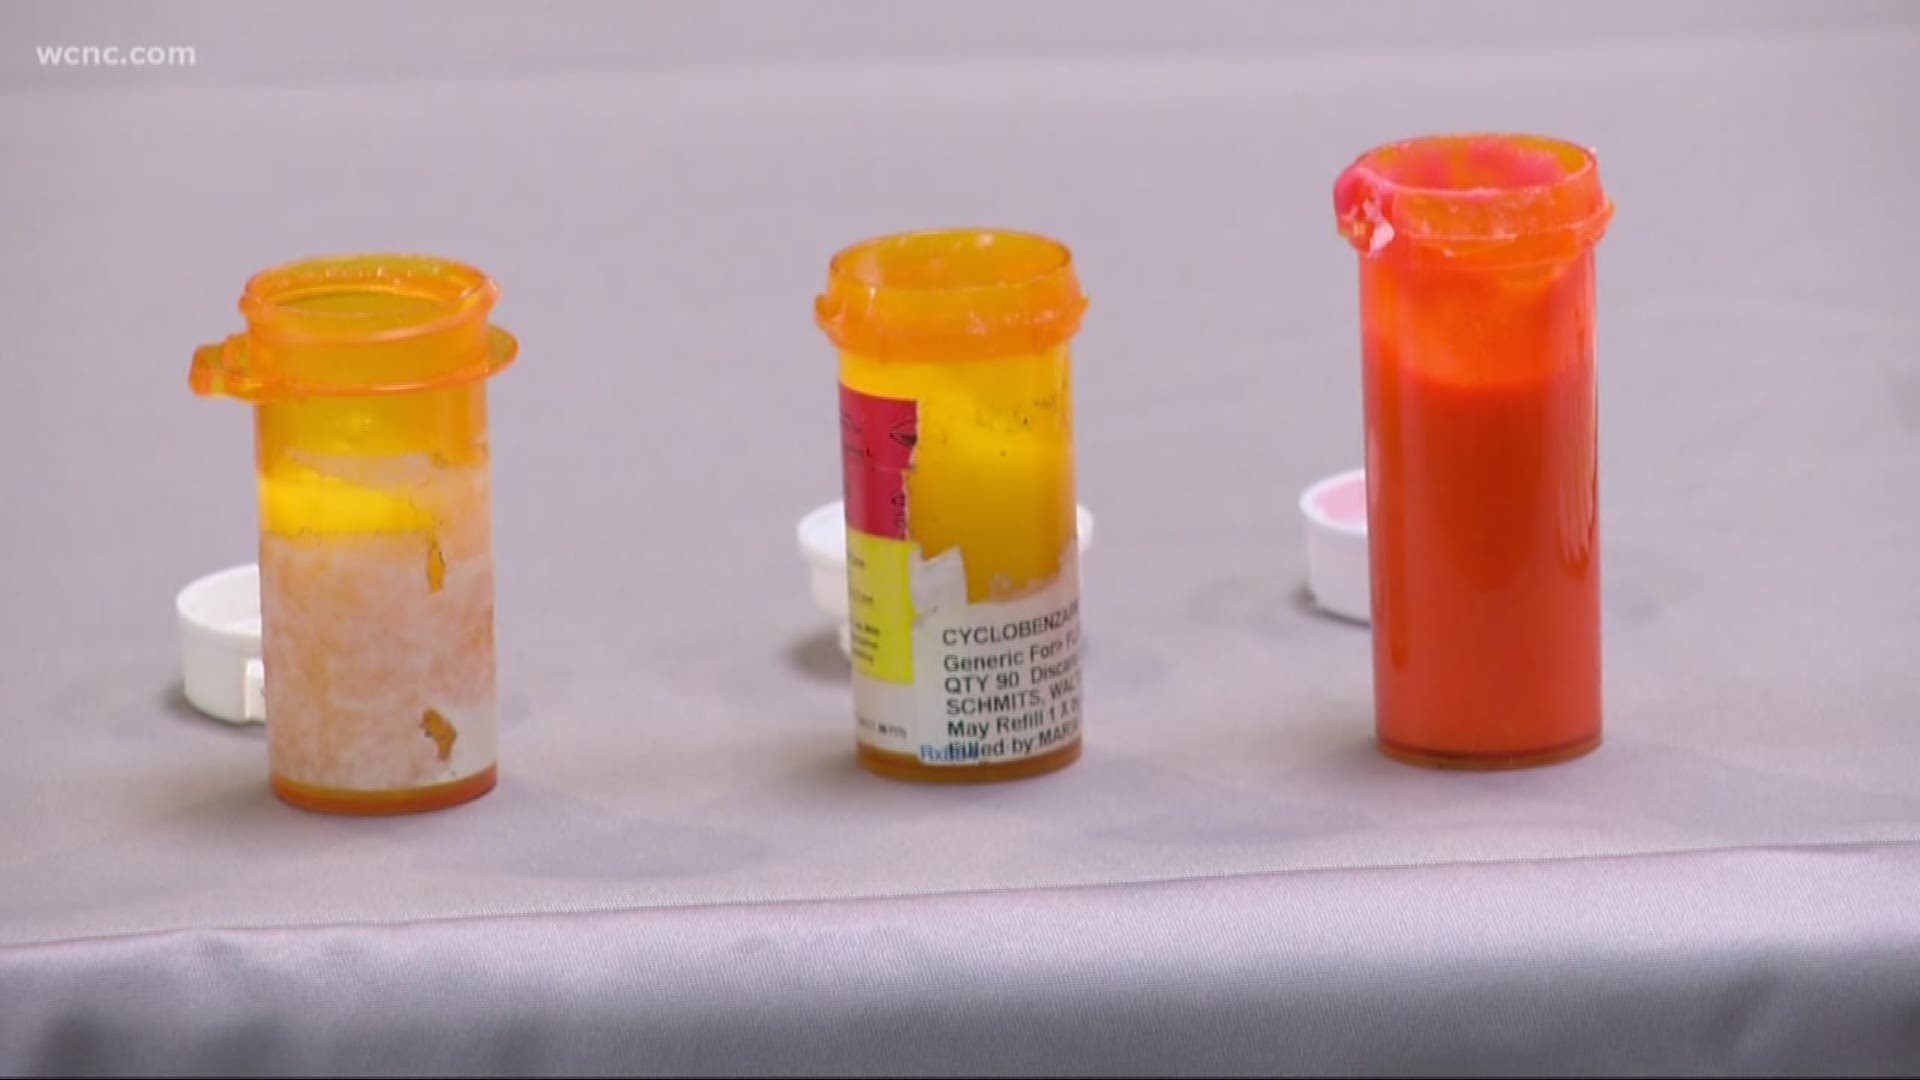 A local police department just announced it has 400 free kits that will take your unwanted pills and transform them into gels.